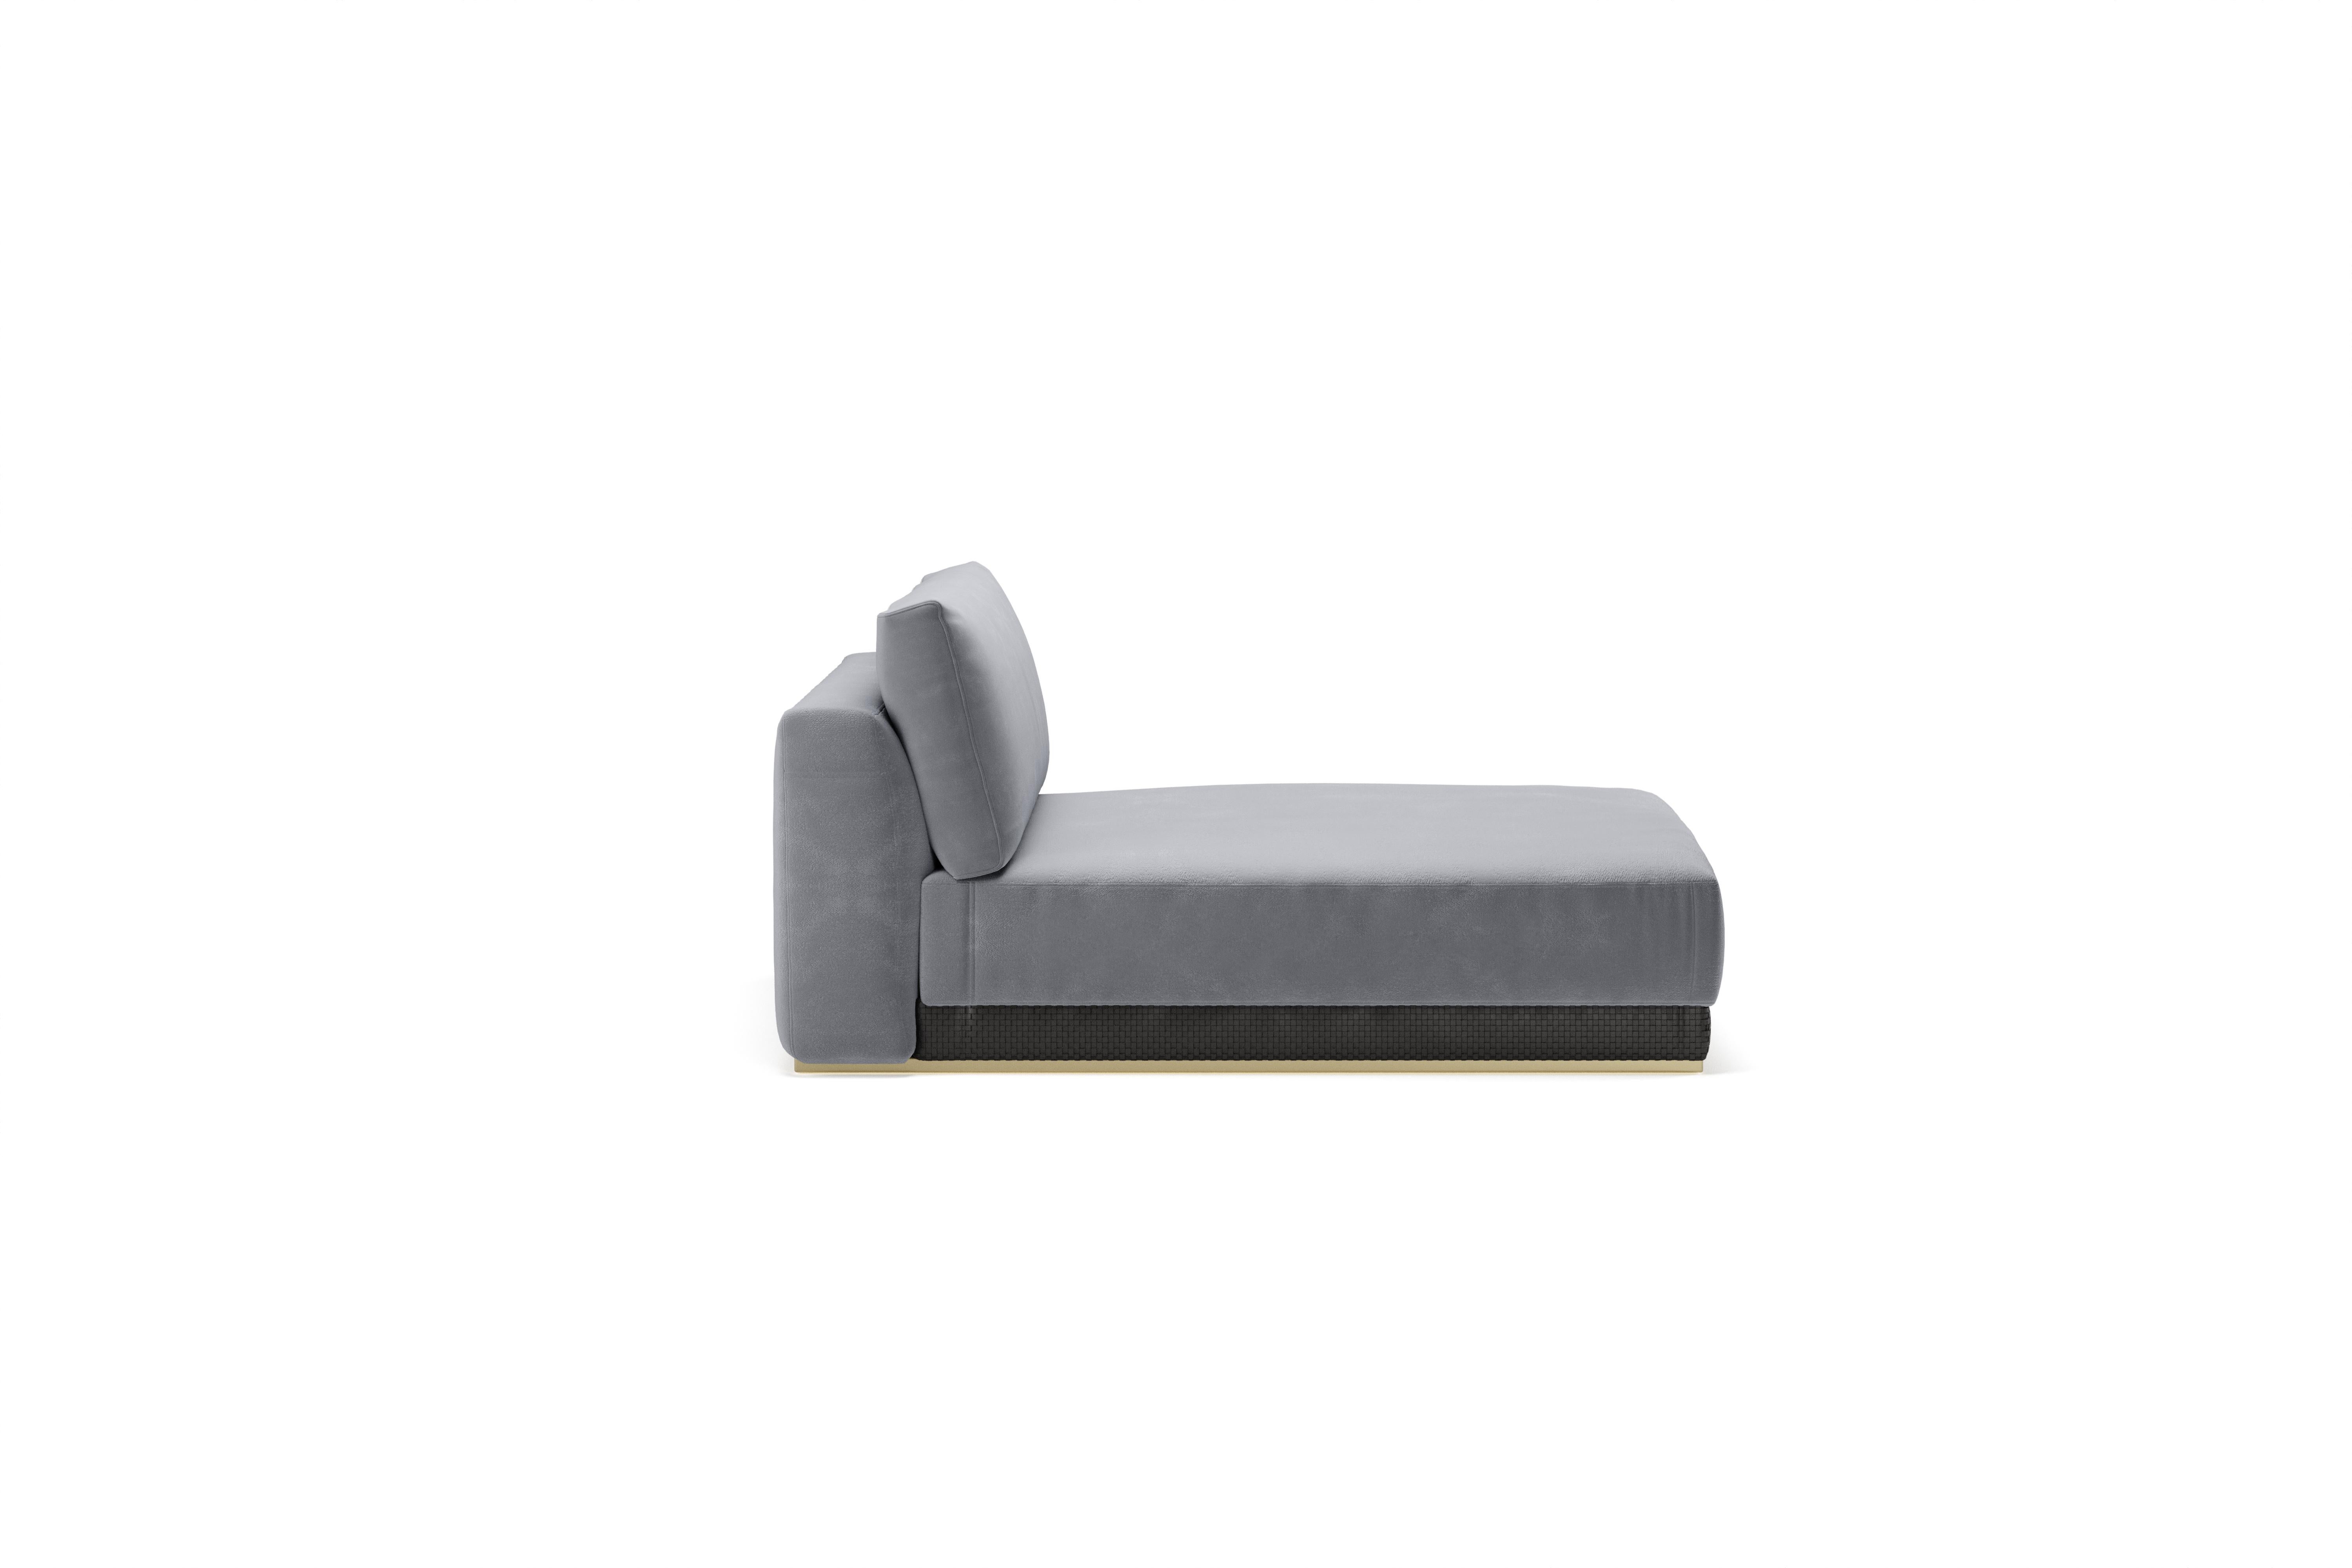 Gaston daybed is an wooden padded, multy-density rubber element of the modular sofa. Its seat is made in wood with interwoven belt. This element comes in a wide range of velvets, leather and nabuk coverings. The basement has beautiful metal